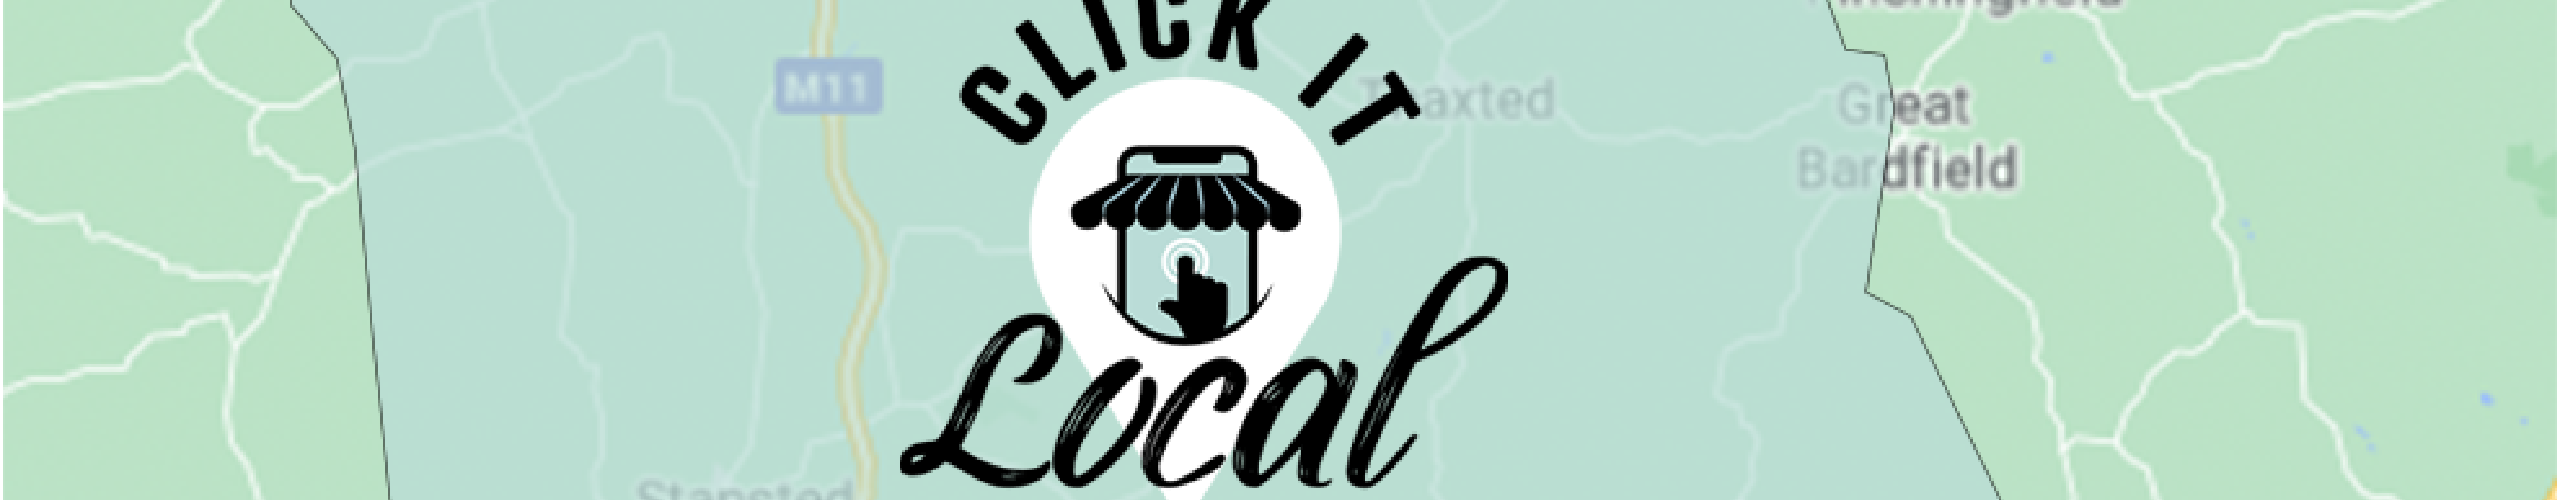 Click it Local panel background